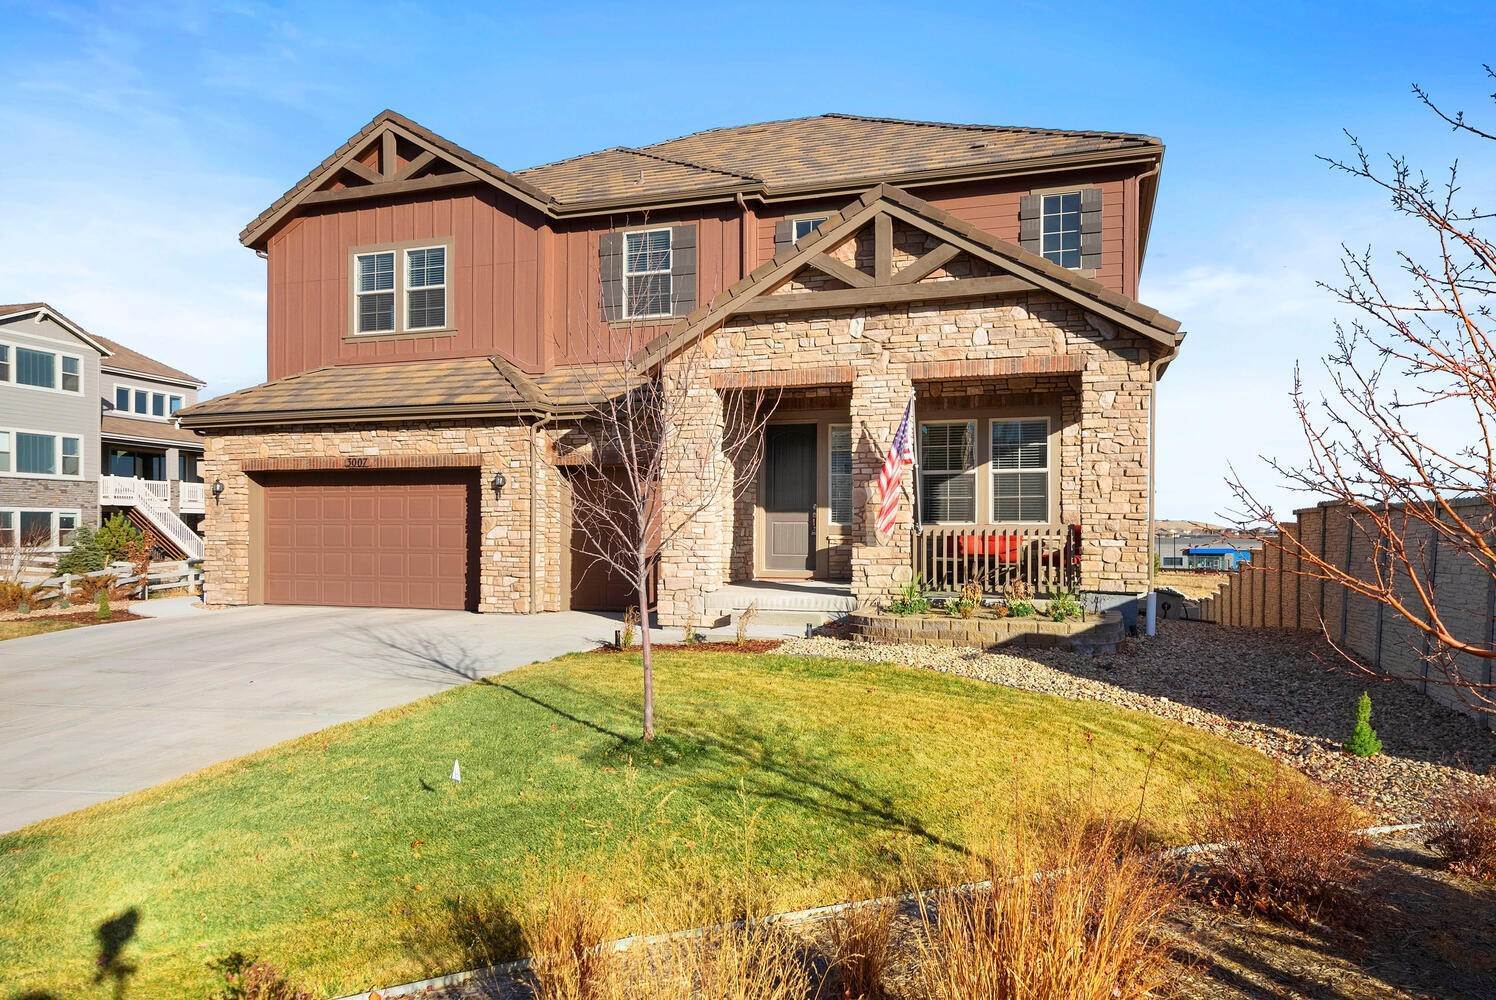 Single Family Homes for Active at Welcome to this Stunning Anthem Highlands Home! 3007 Yale Drive Broomfield, Colorado 80023 United States